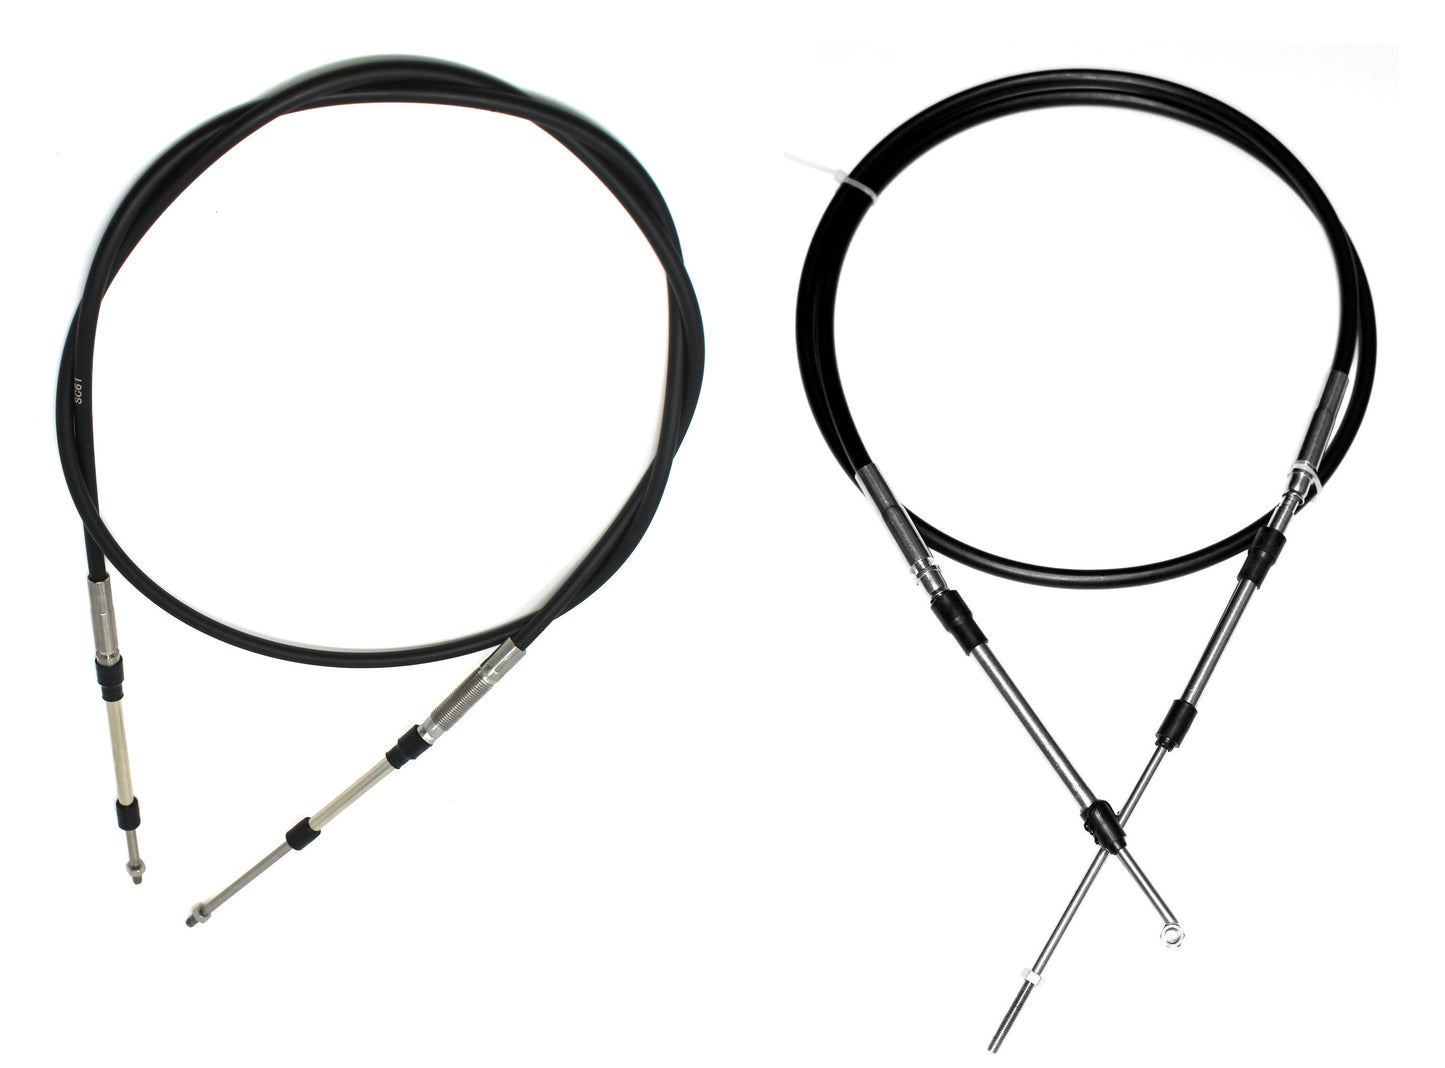 Aftermarket SeaDoo Steering & Reverse Cable Set Replacement for Seadoo 99-11 GTX GTI fits 277001580  002-045-08  26-3128 / 277000944  JSP Brand